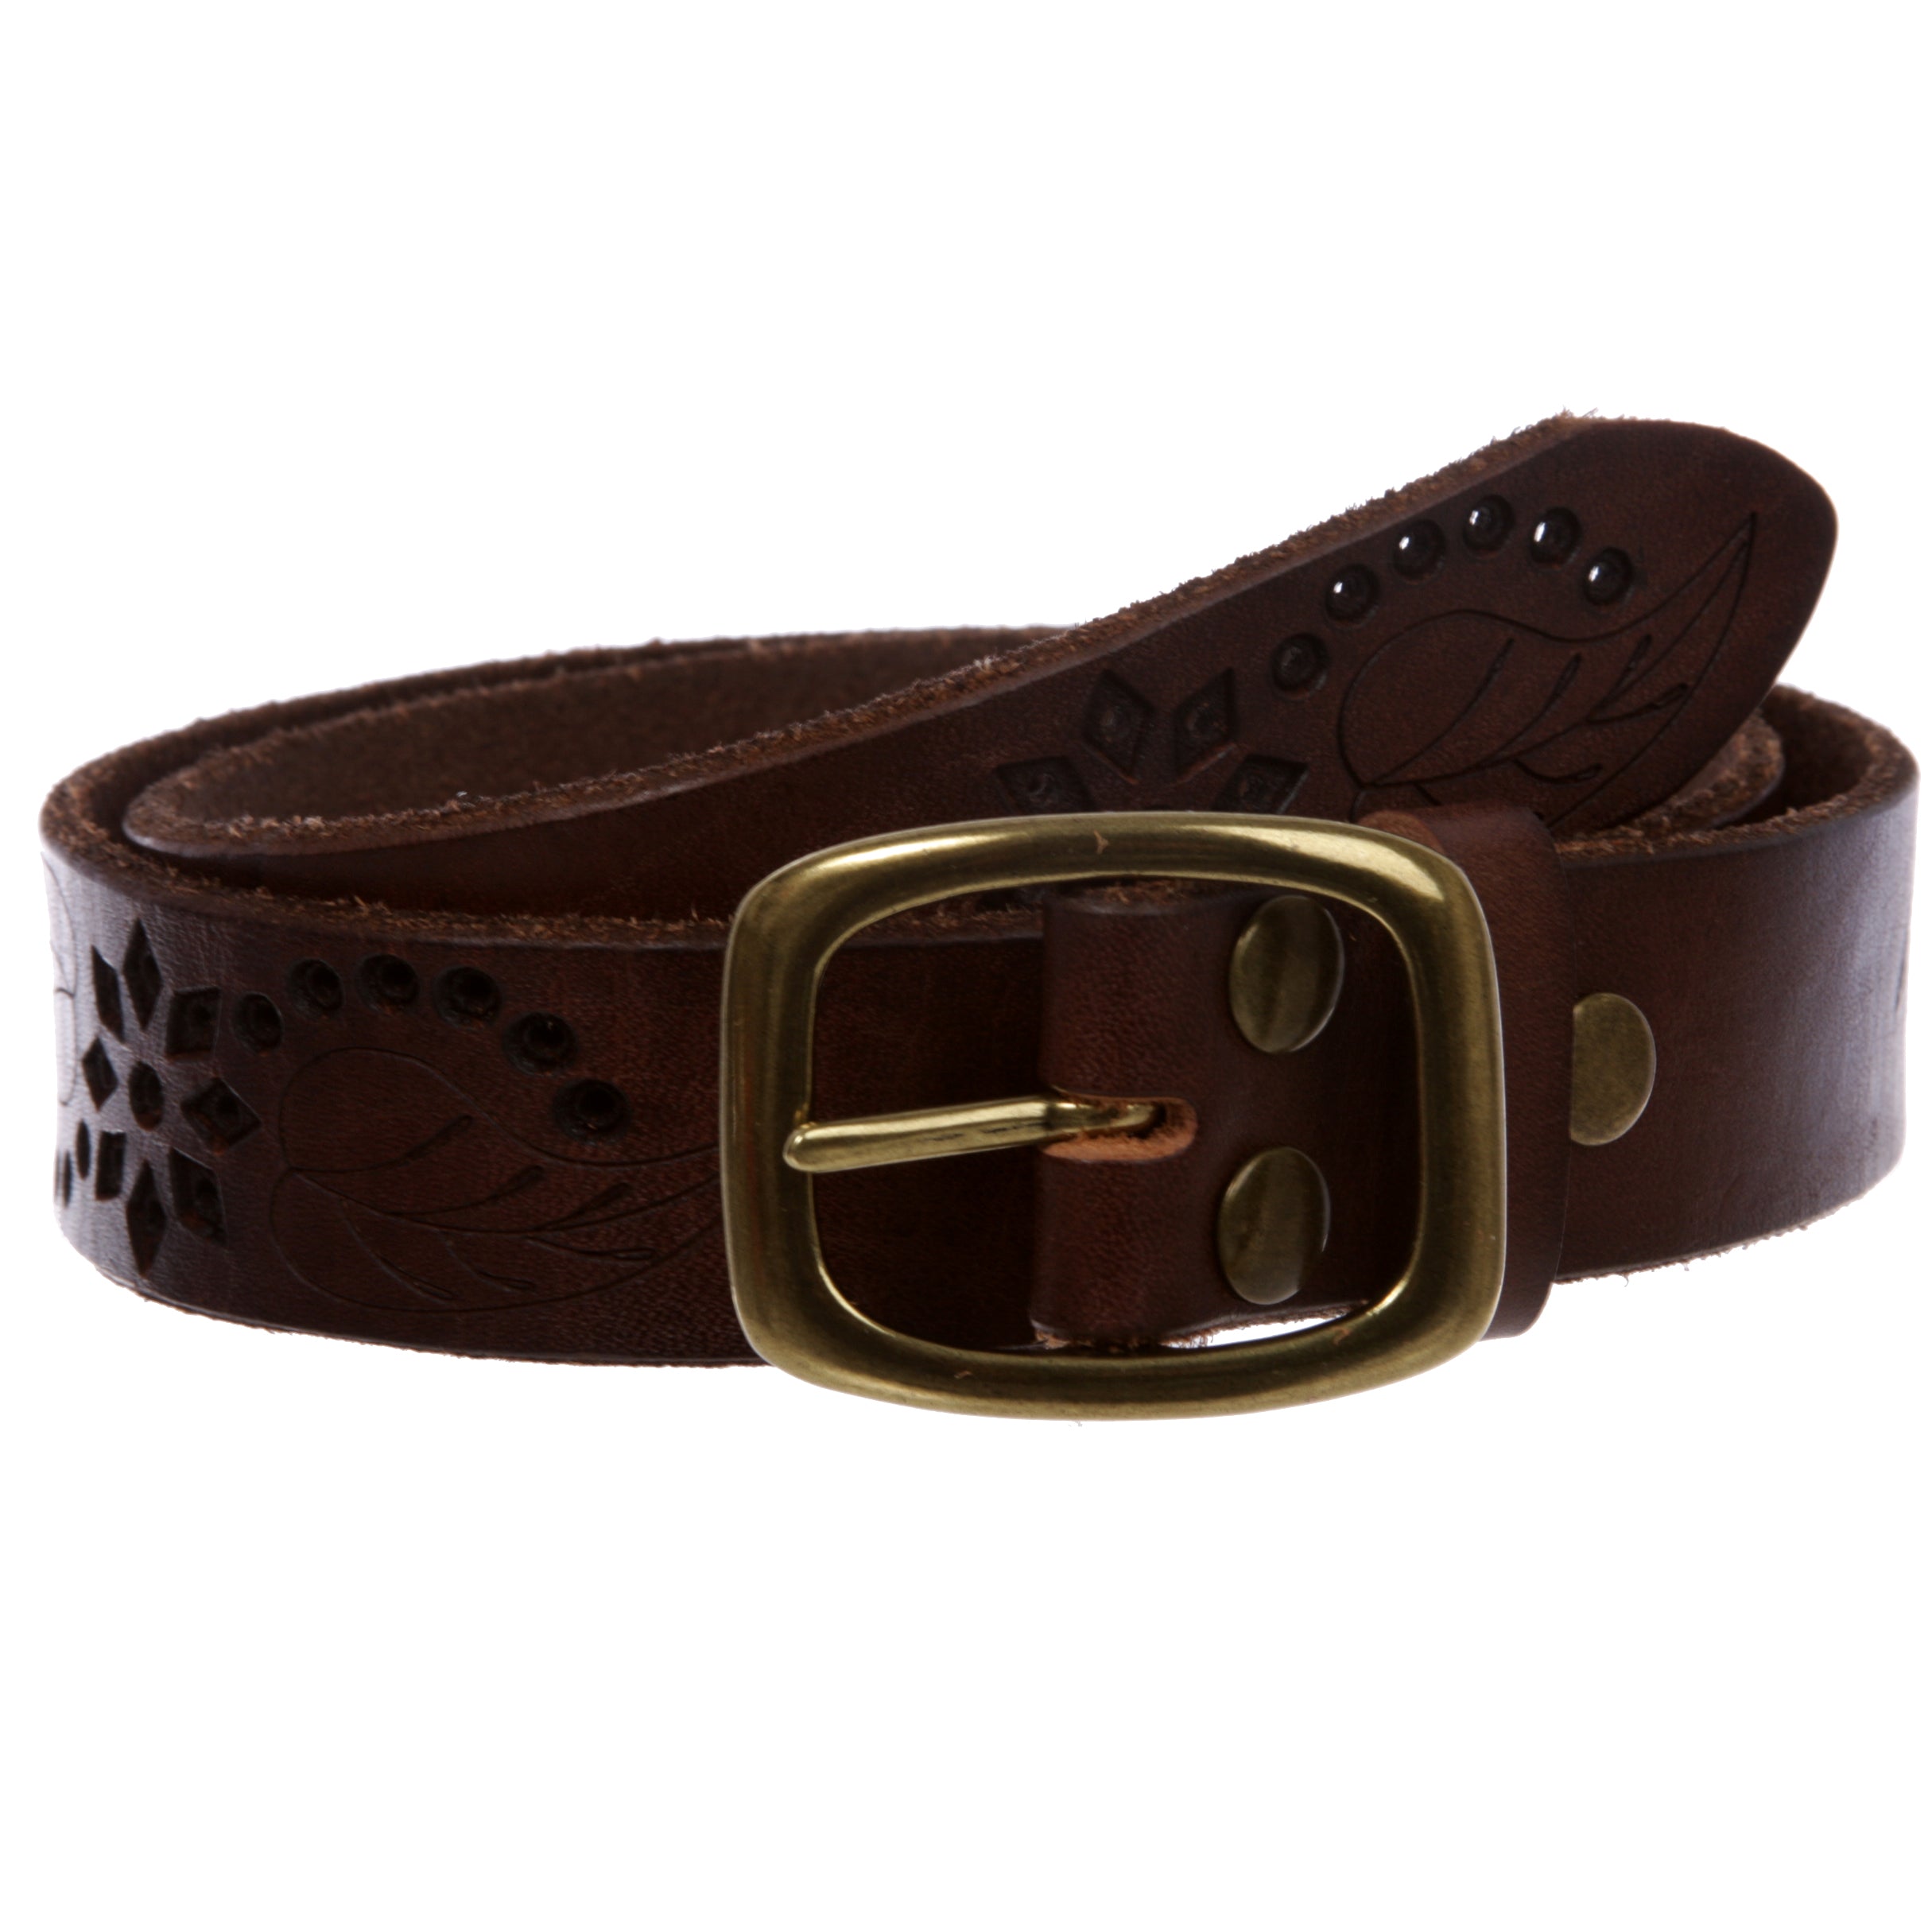 1-1/4" Perforated Oval Embossed Casual Vintage Leather Jean Belt